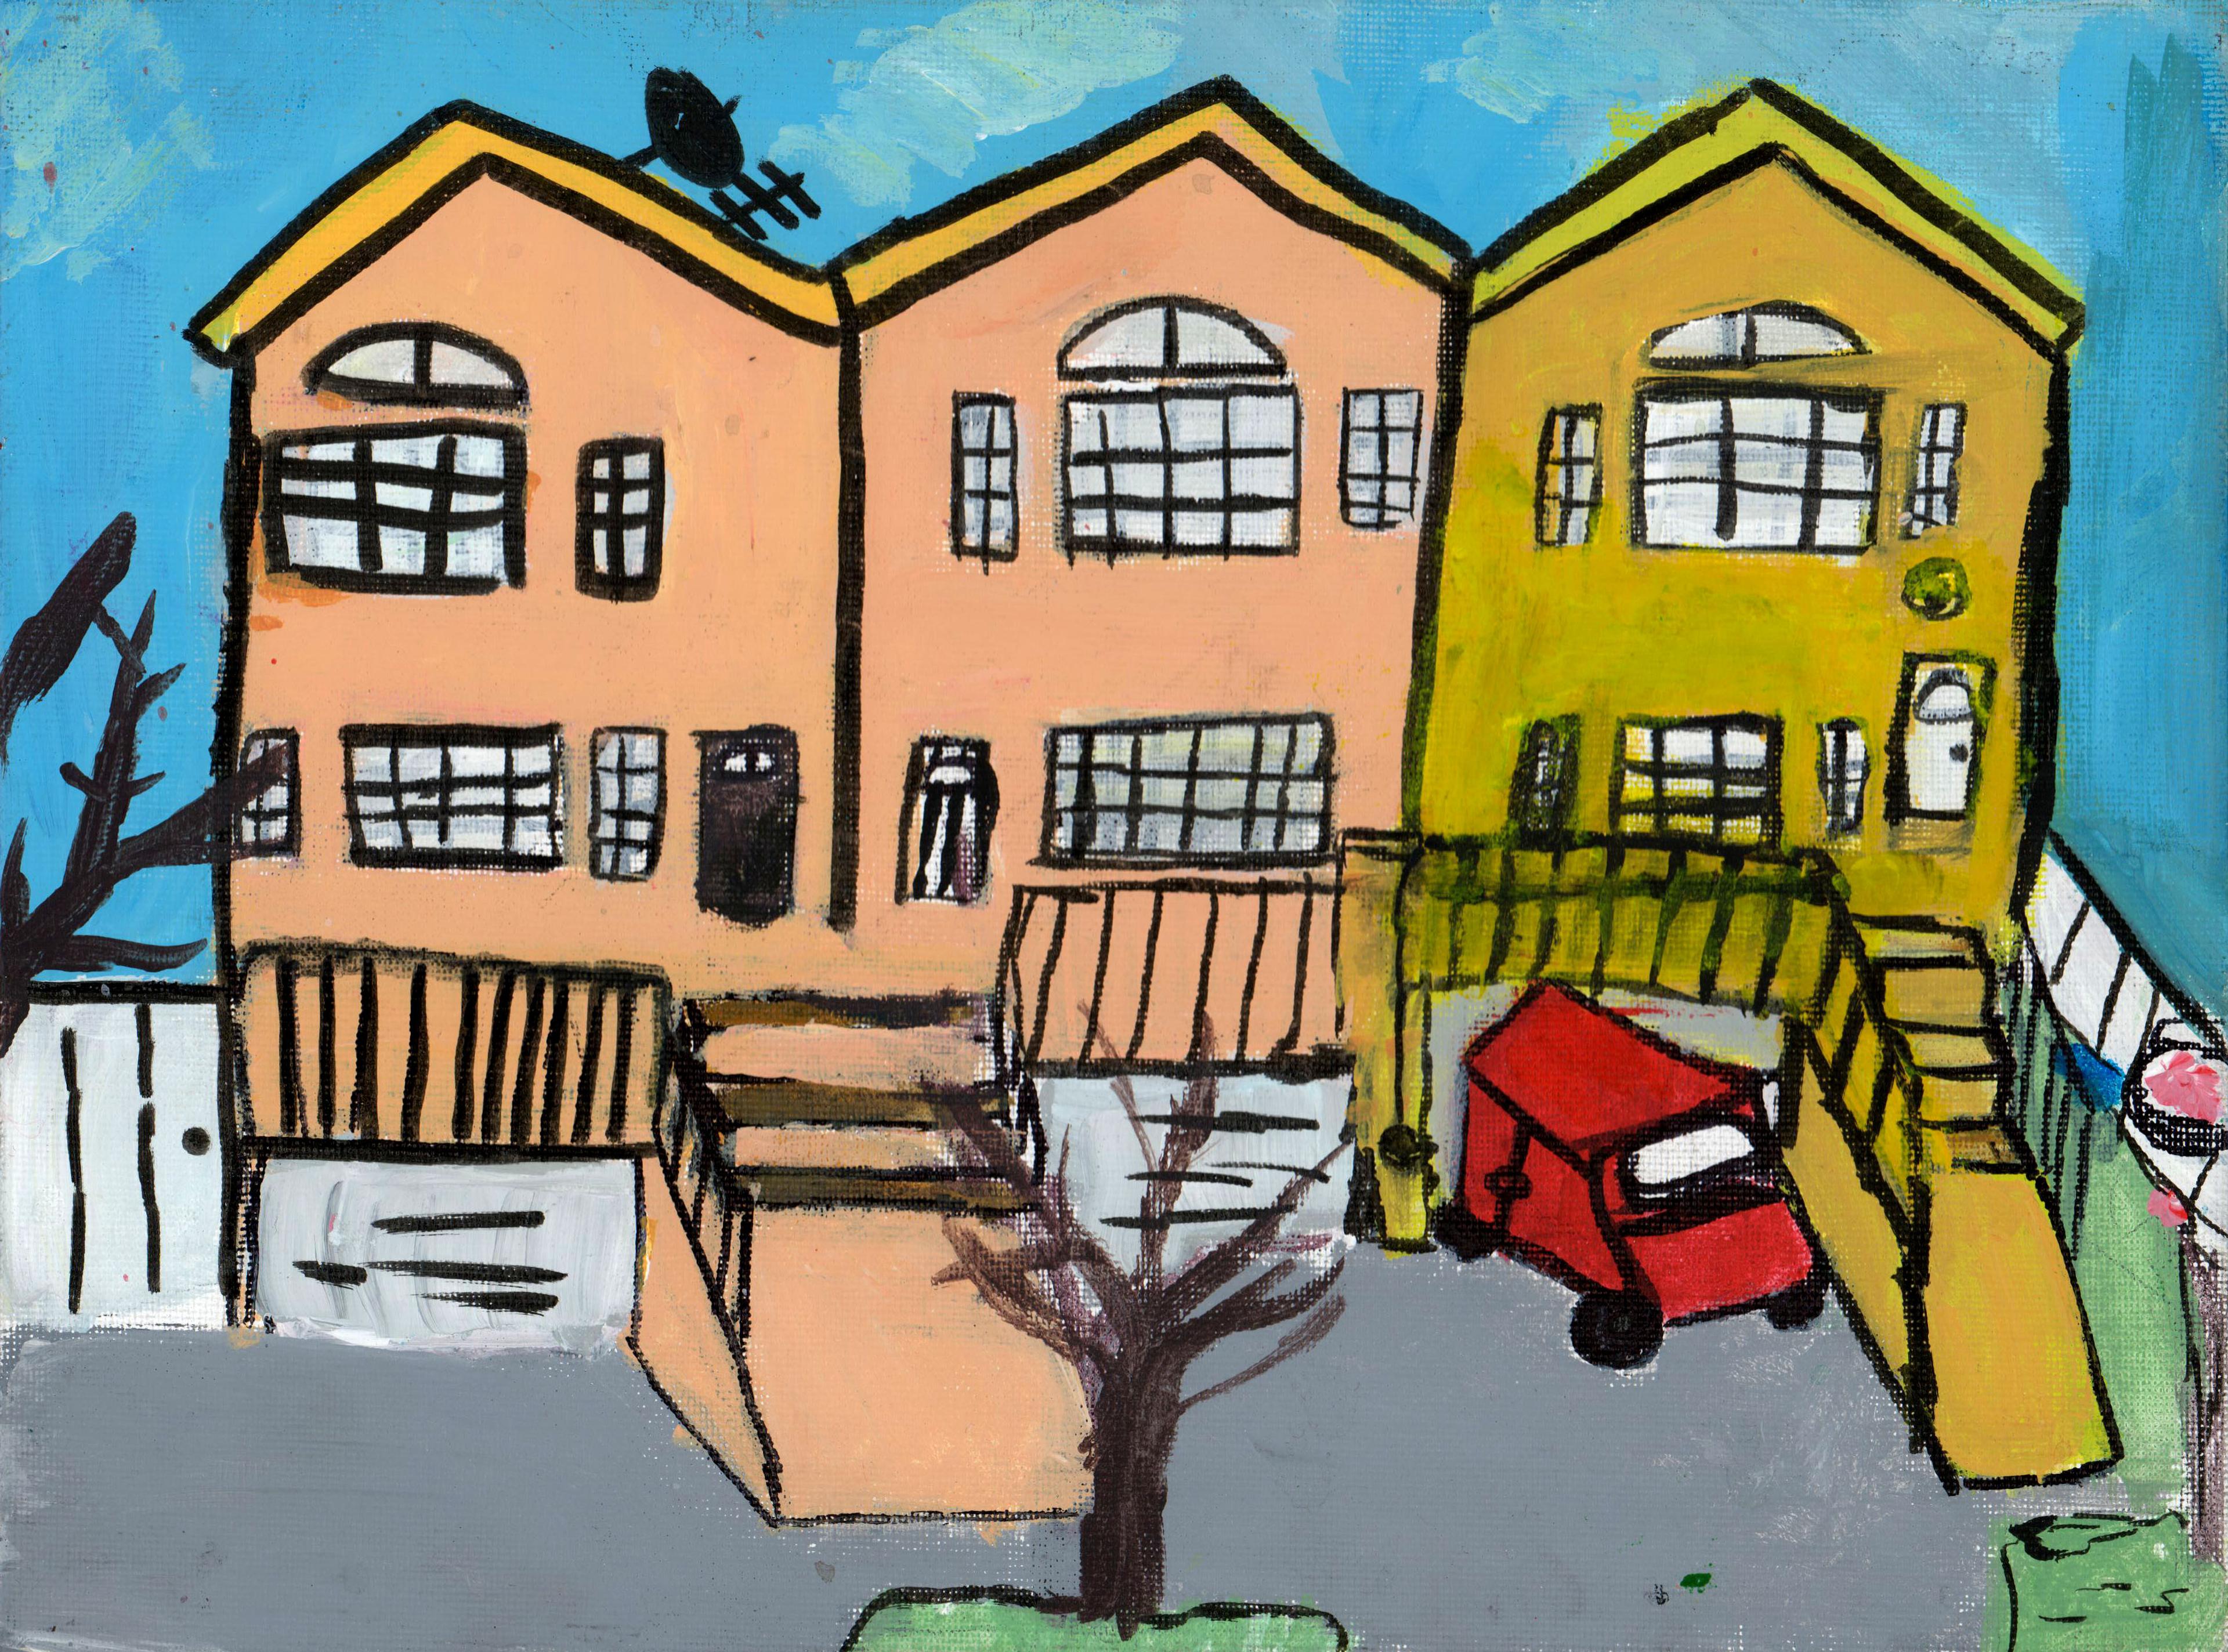 Acrylic painting of three two-story row houses side by side on a residential block. The two houses to the left are peach colored, and the third house to the right is dark yellow. A red car is parked in front of the garage below the yellow house. A black satellite dish and antenna are painted on the roof of the house at far left. A brown leafless tree on a green patch of land appears at bottom center in front of the three houses. All the houses are outlined in bold black strokes.